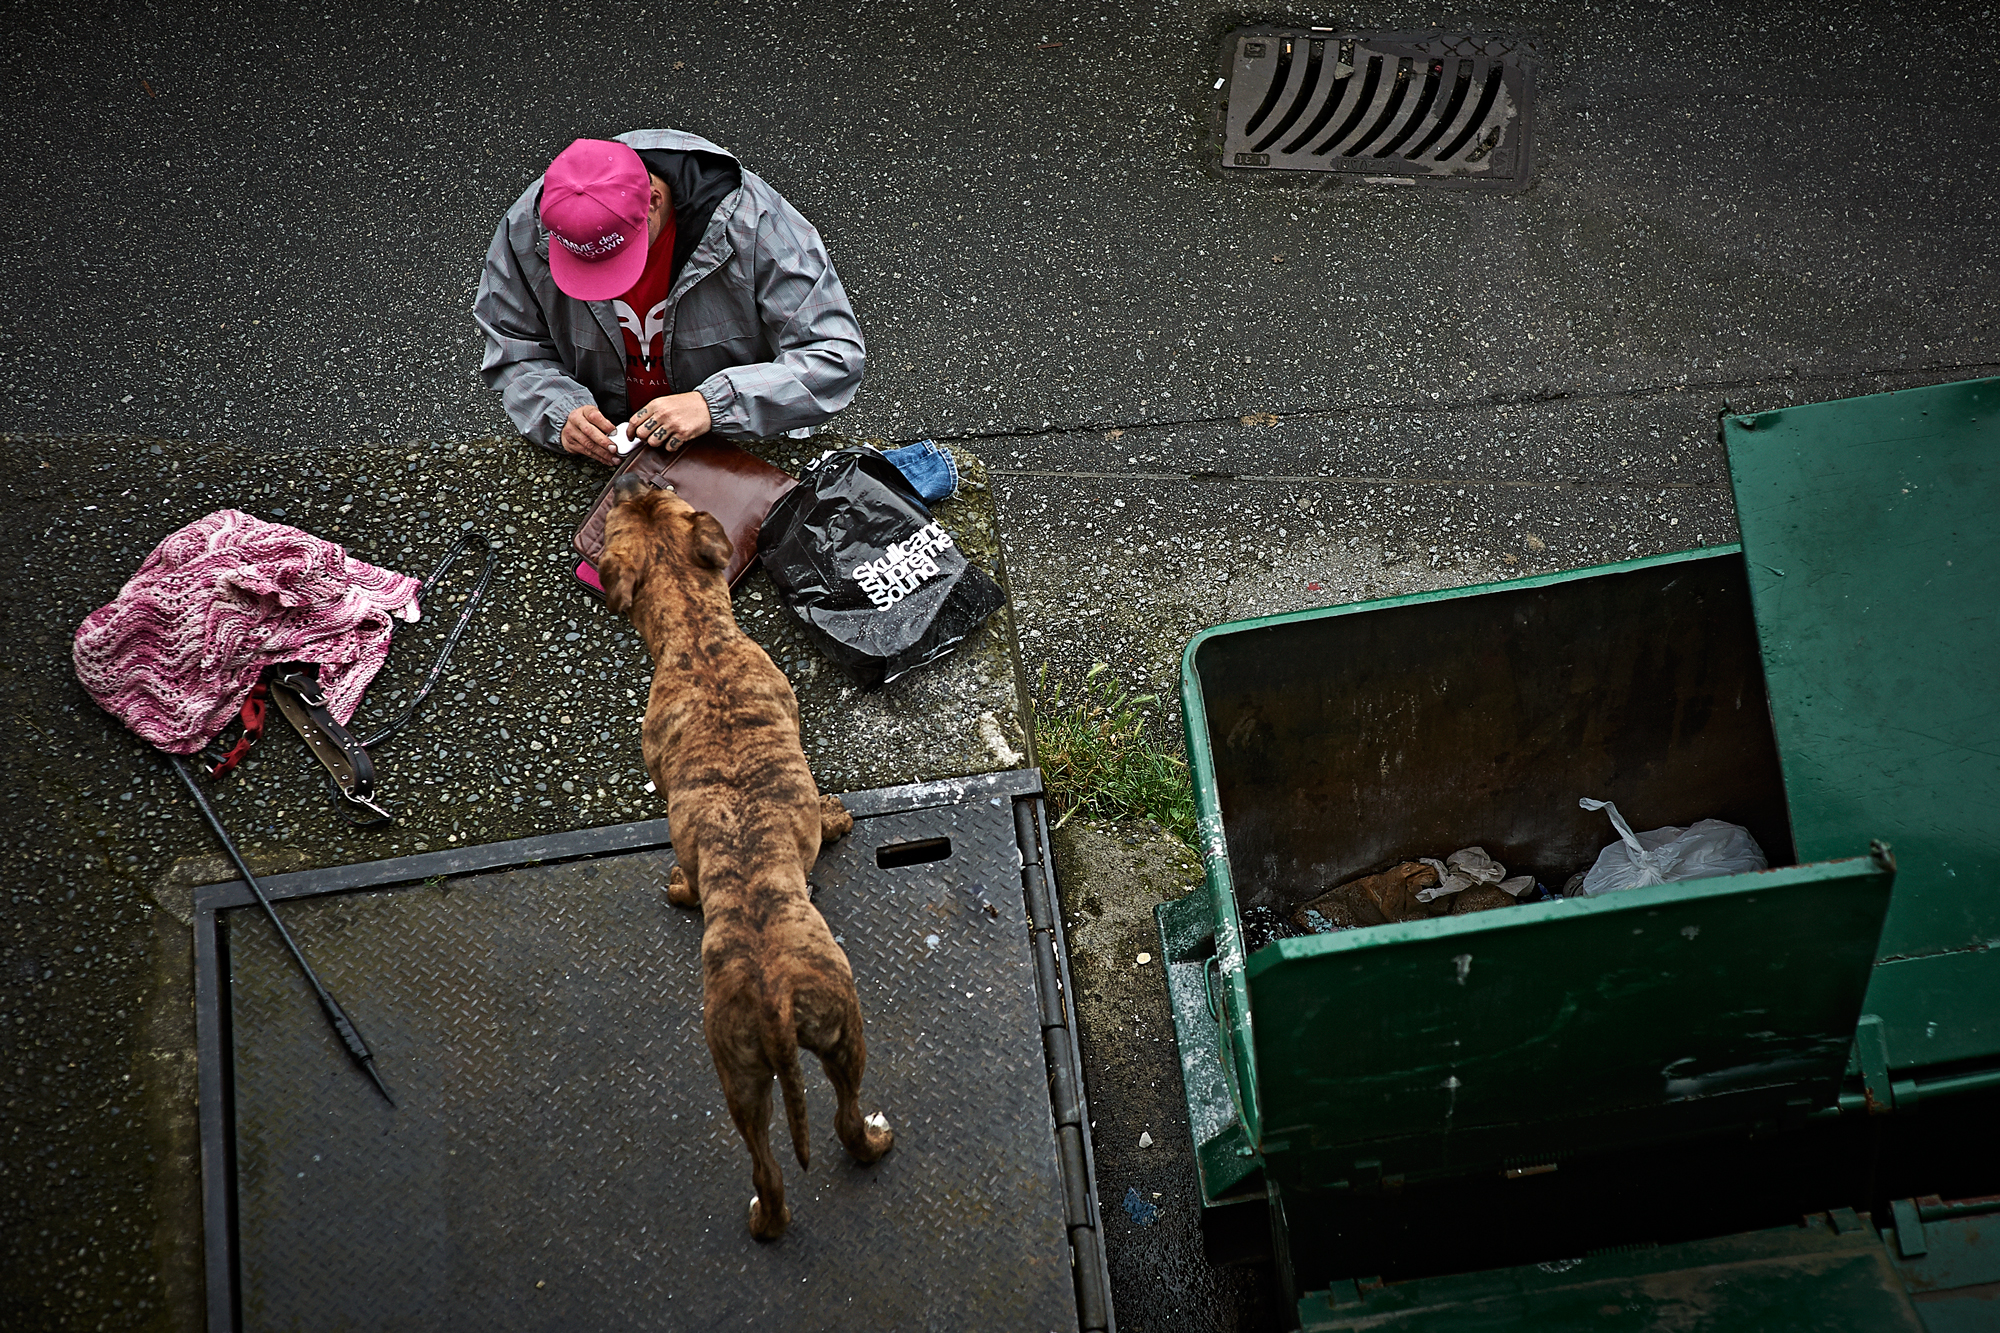 A man searches through discarded items as his dog watches. June, 2014.